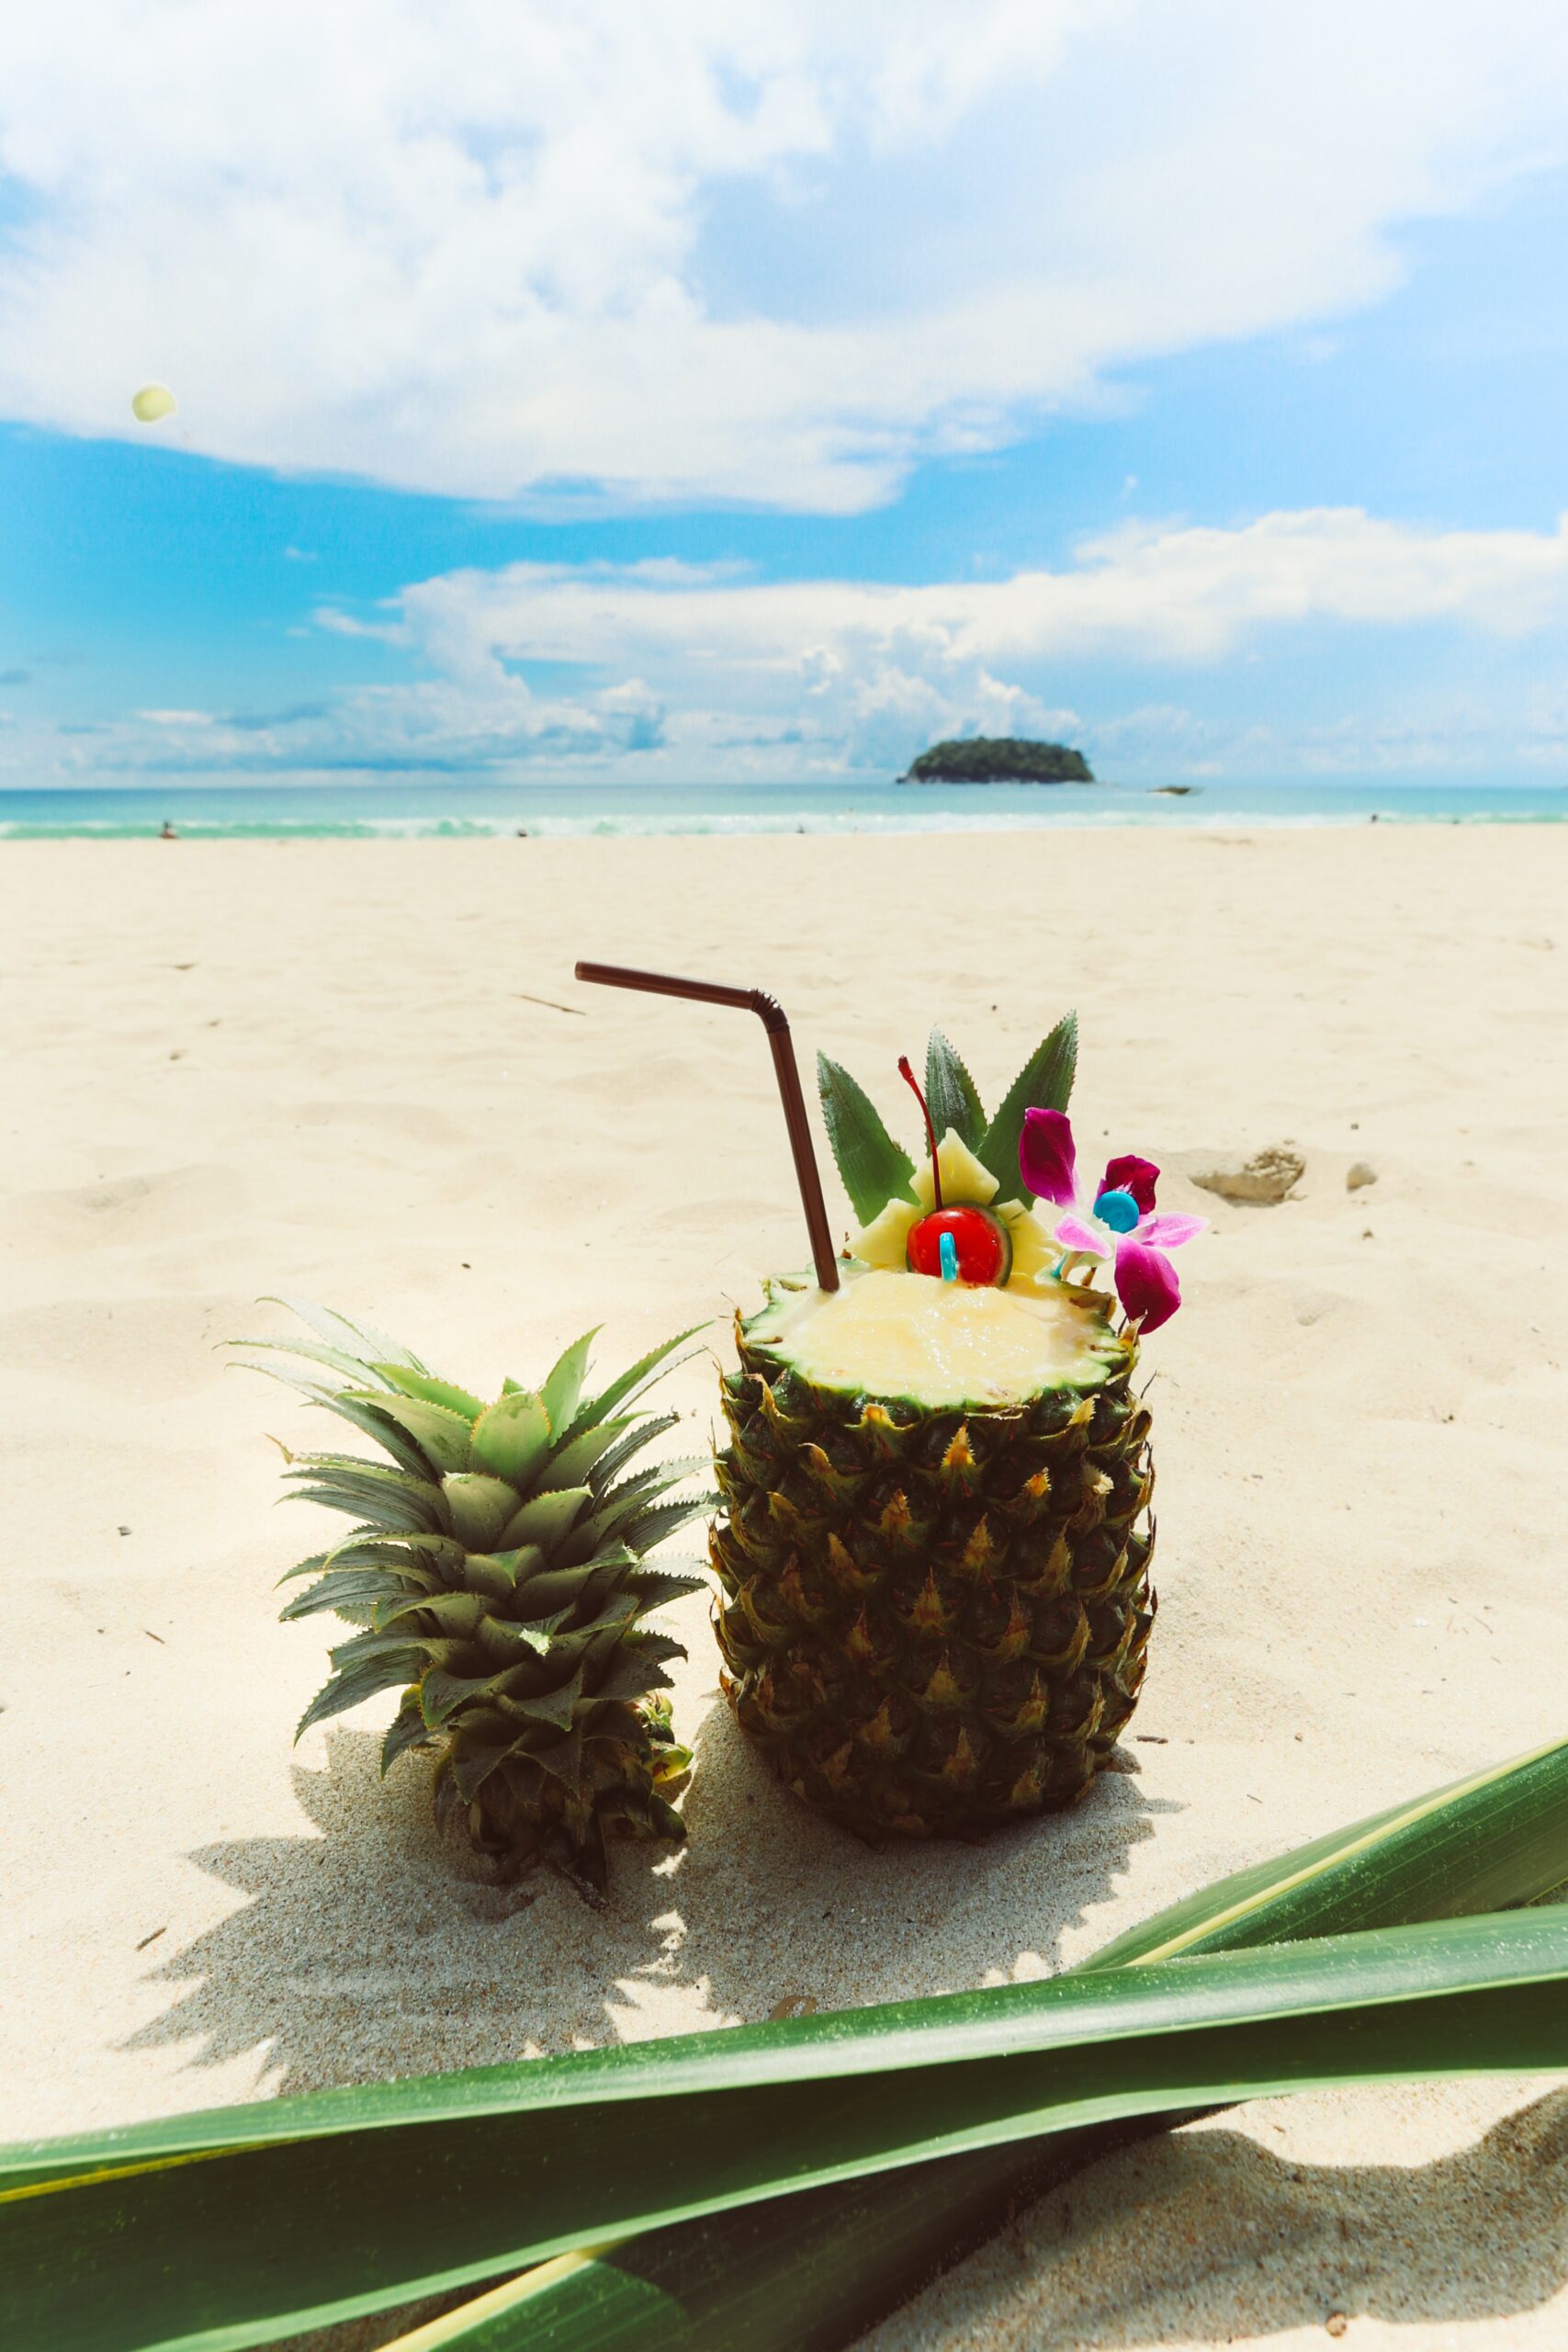 Pineapple with Top Cut Off and Straw for drinking out the juice on the beach with a beautiful blue sky in the background